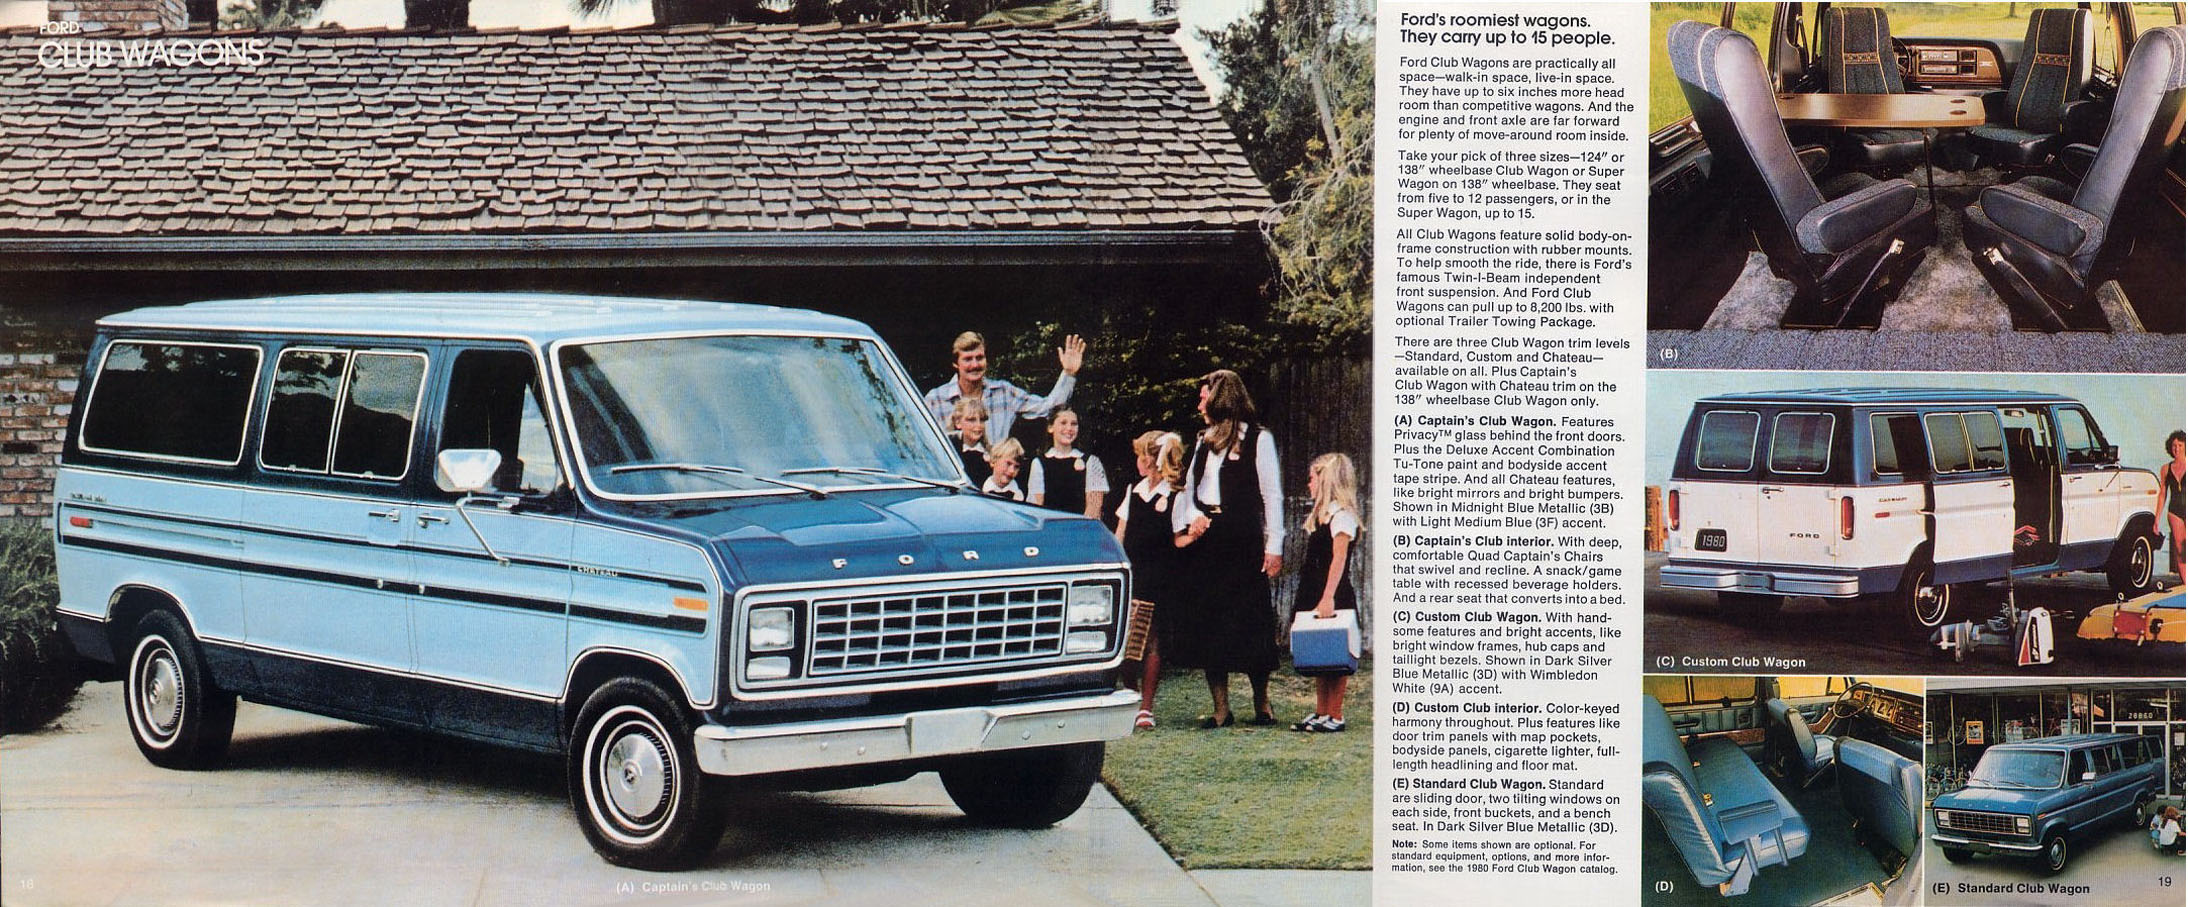 1980 Ford Wagons-10